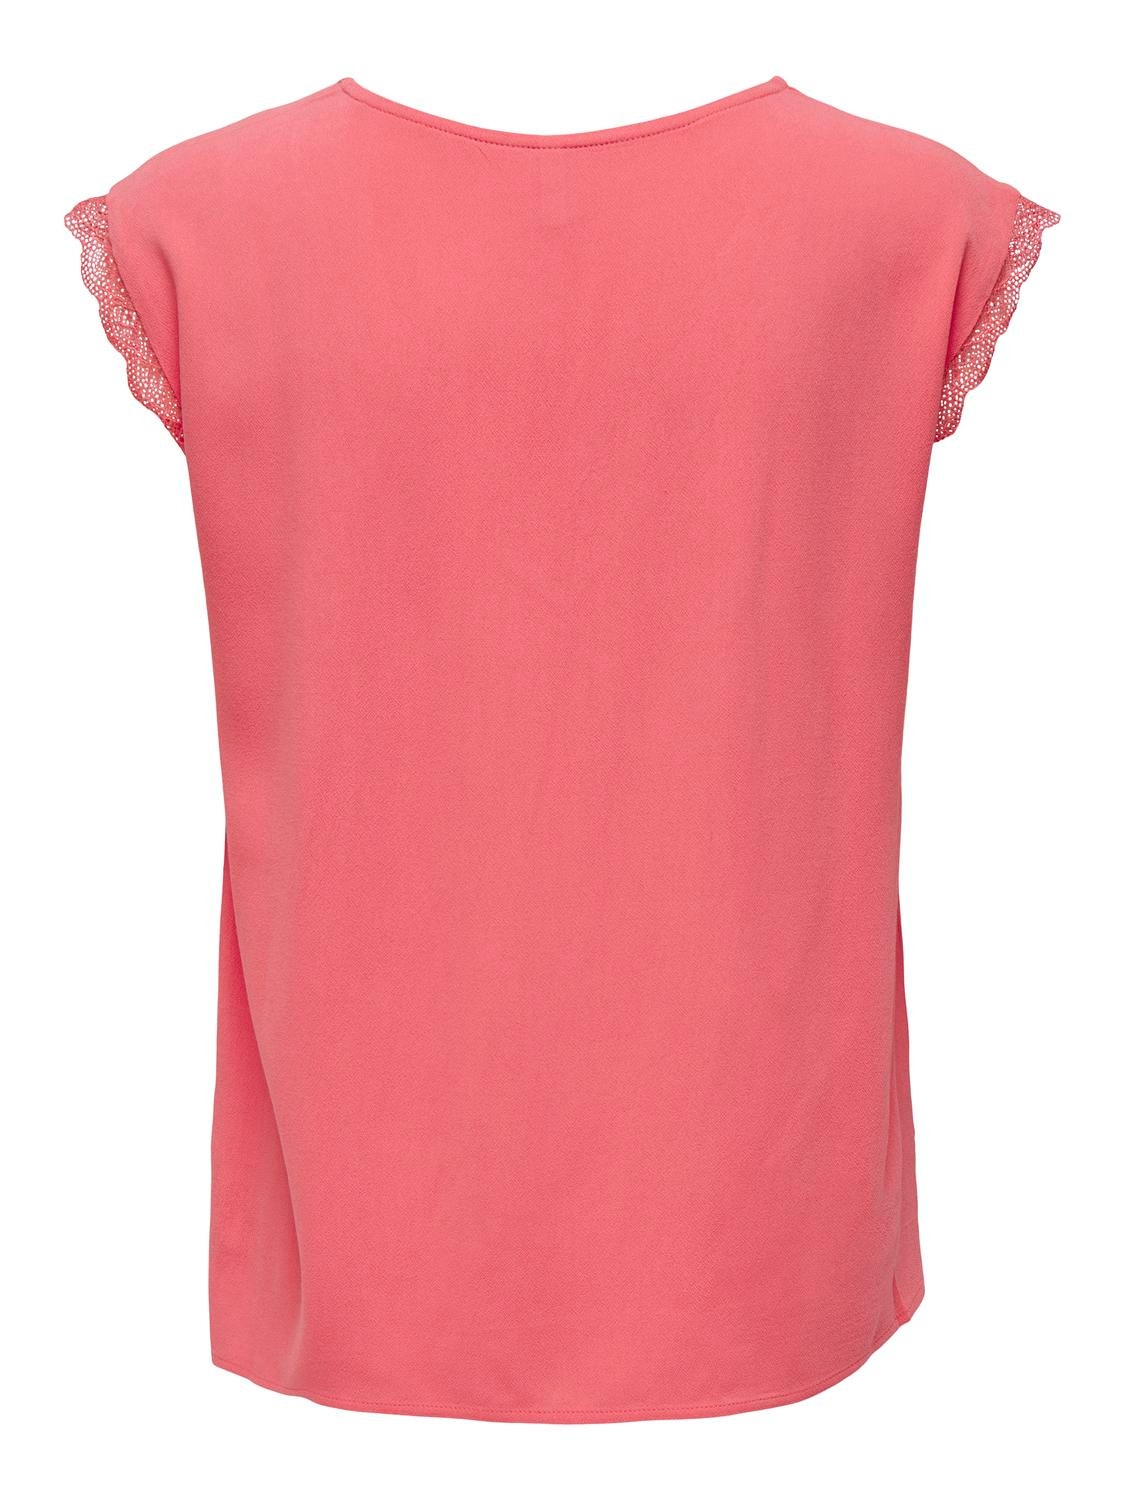 ONLY V-neck top with lace details -Rose of Sharon - 15252241